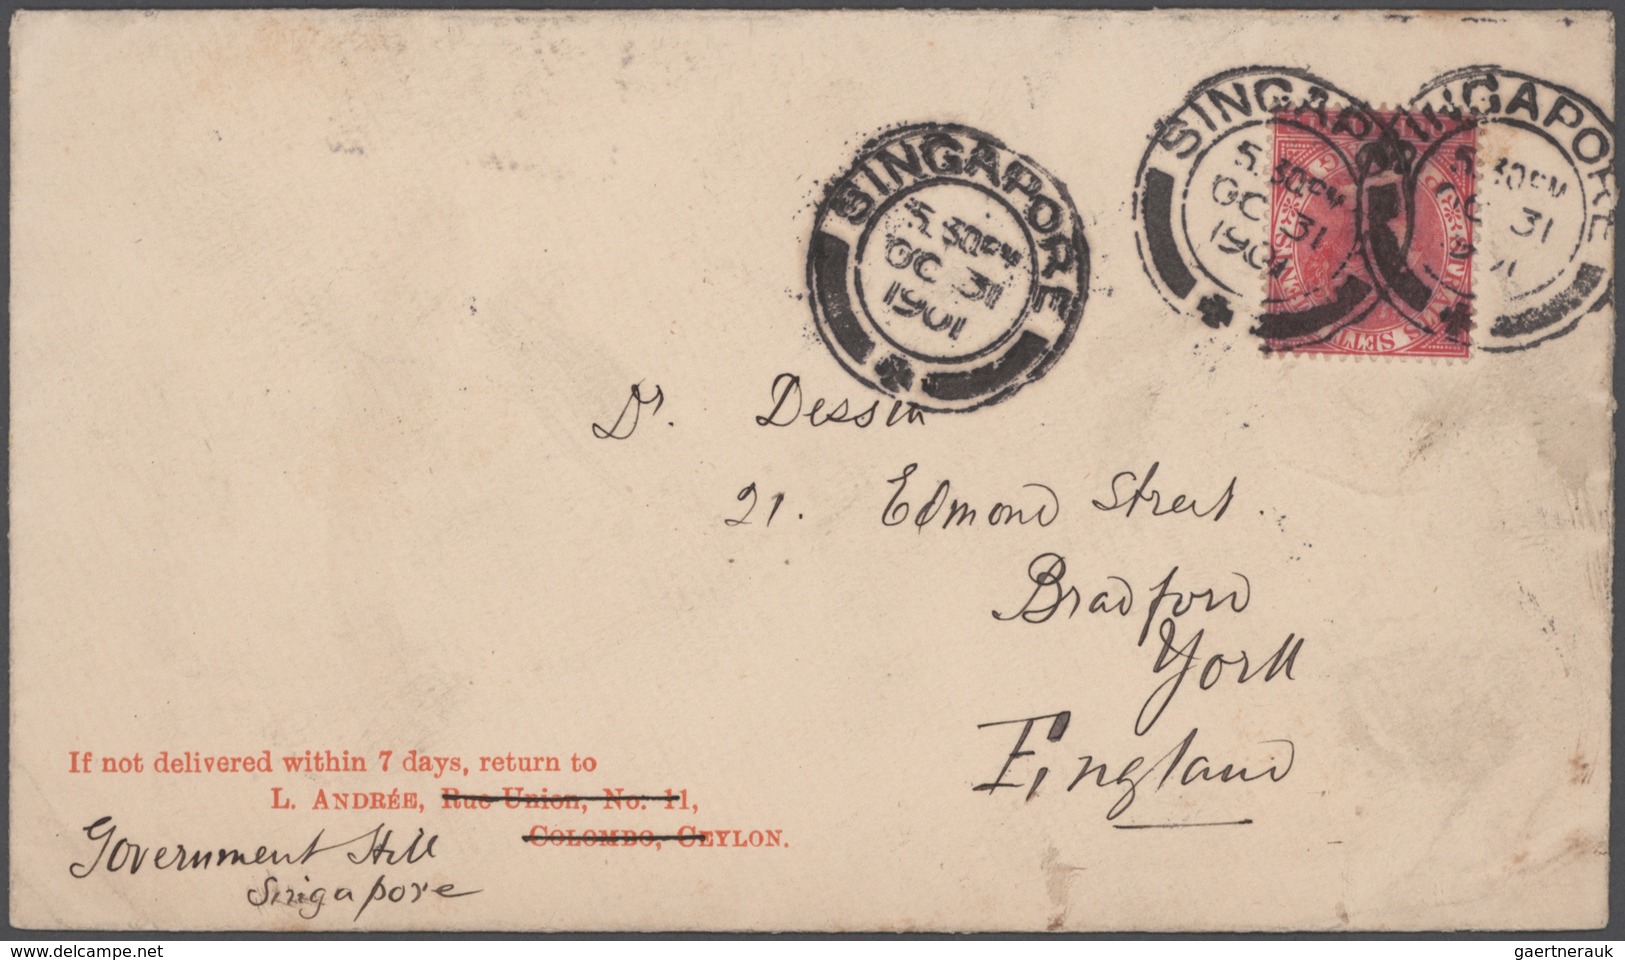 Singapur: 1880's-1950's: About 1500-1600 covers used in Singapore and franked by Straits Settlements